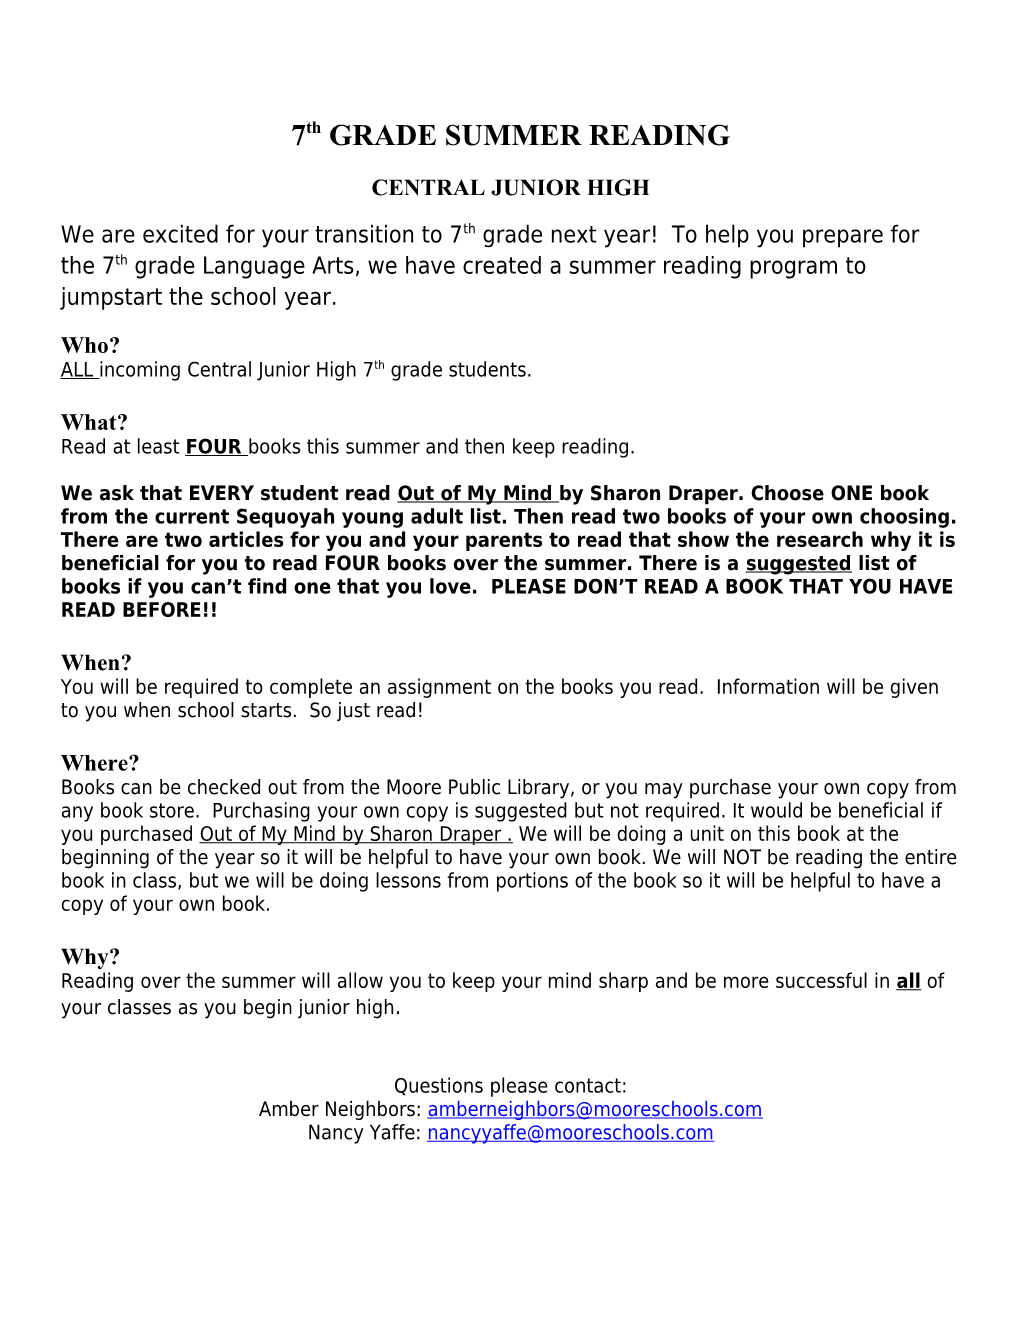 ALL Incoming Central Junior High 7Th Grade Students